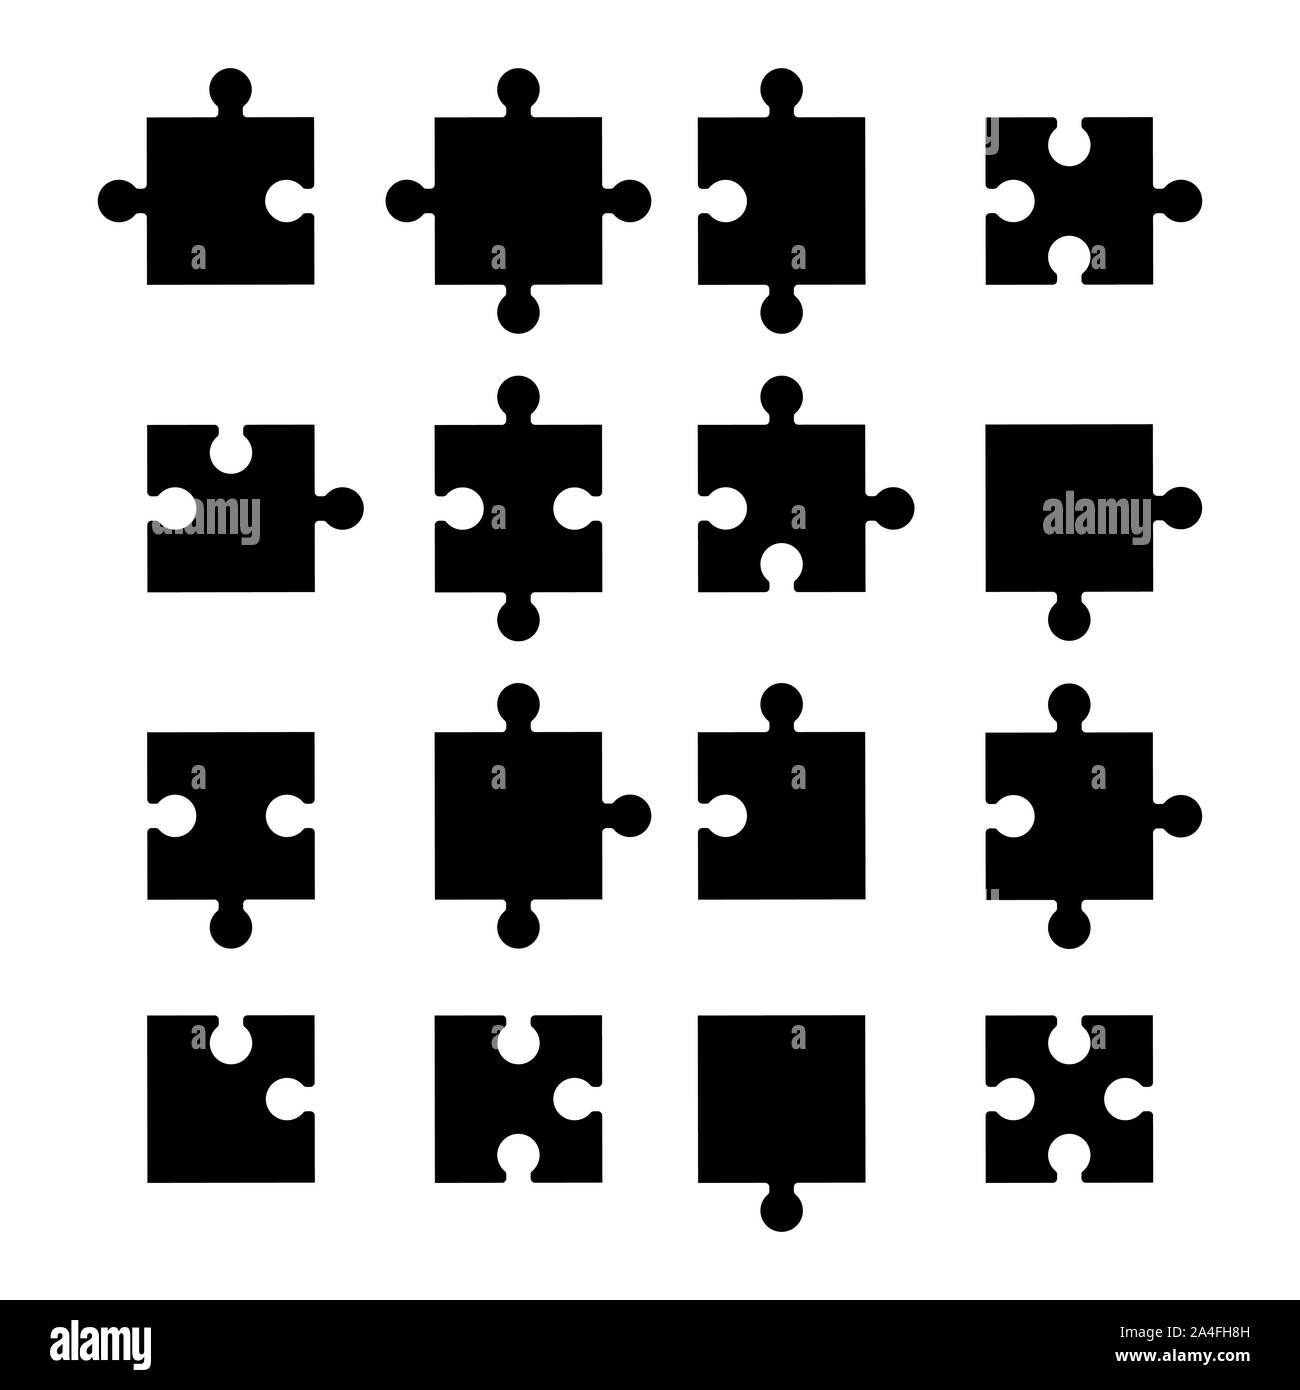 Blank jigsaw puzzle 8 pieces simple line art Vector Image